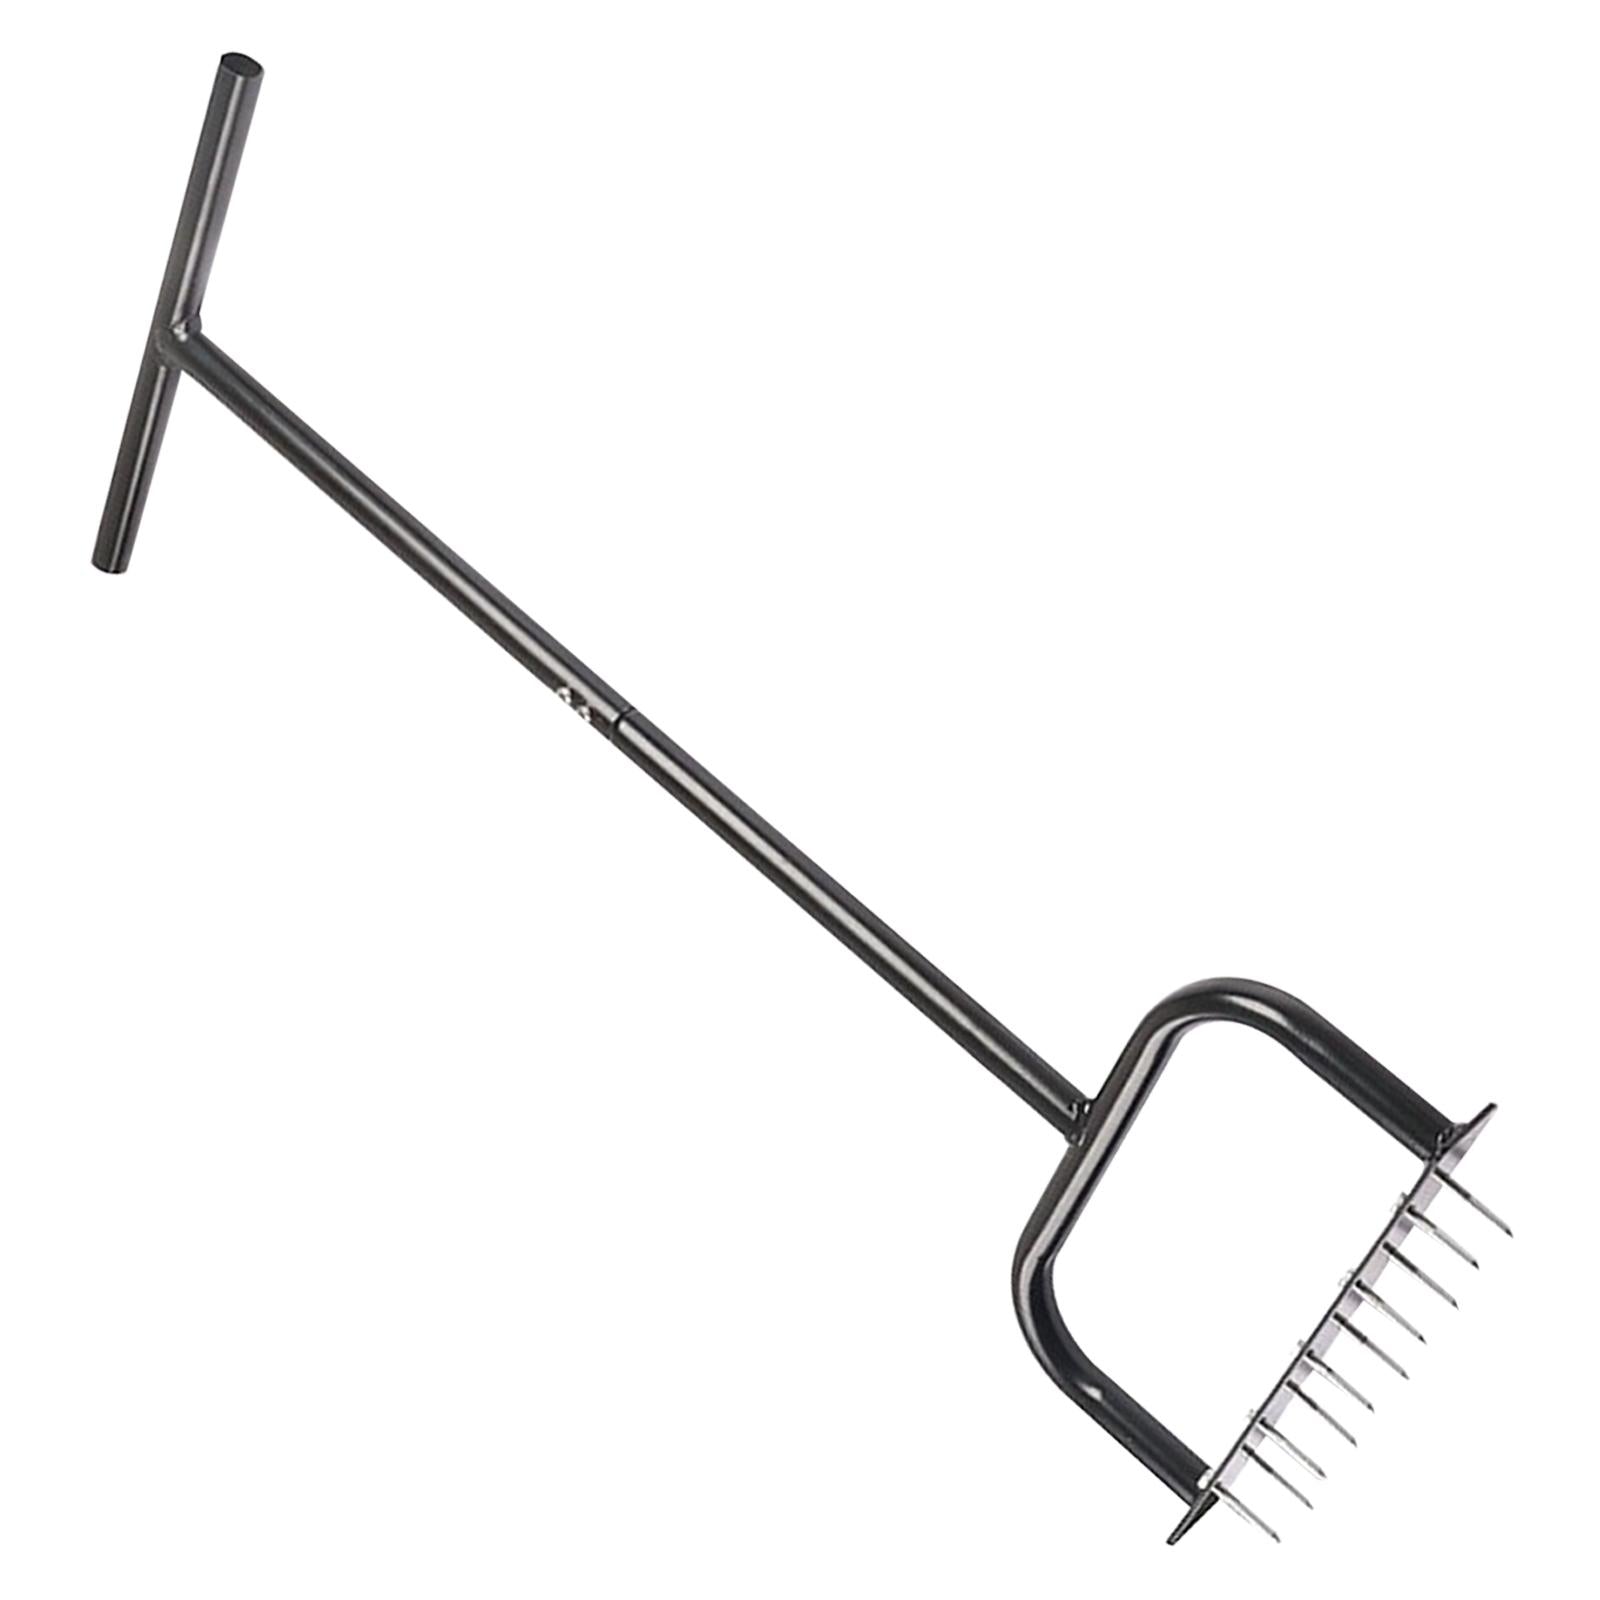 Lawn Aerator Runoff W/ Wrench Grass Dethatching Puller Lawn Carbon Steel for